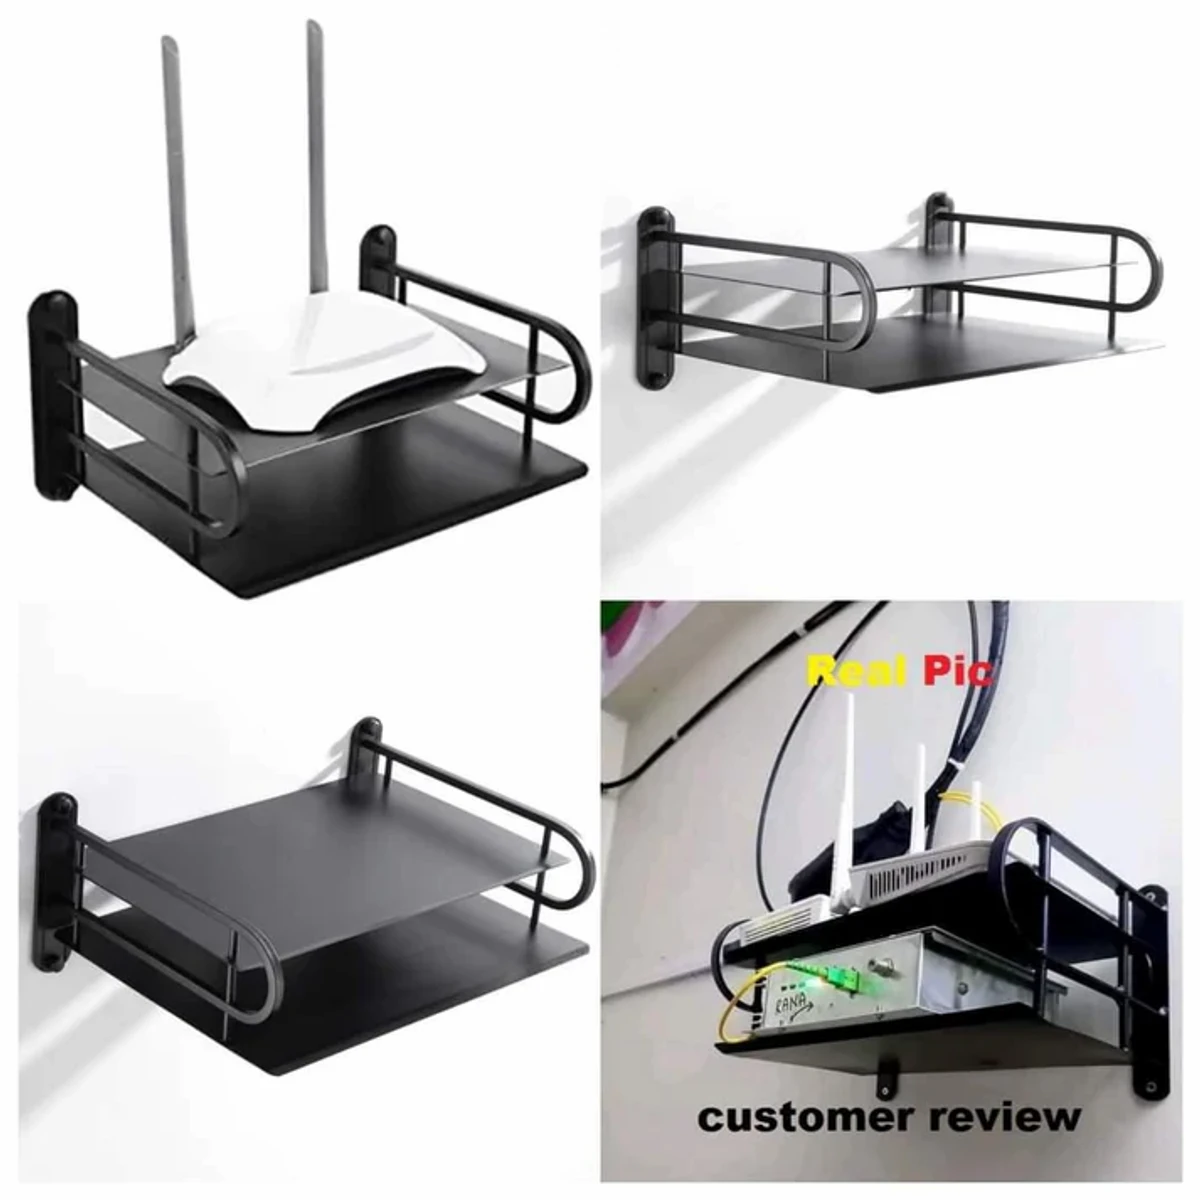 Wall mounted router stand